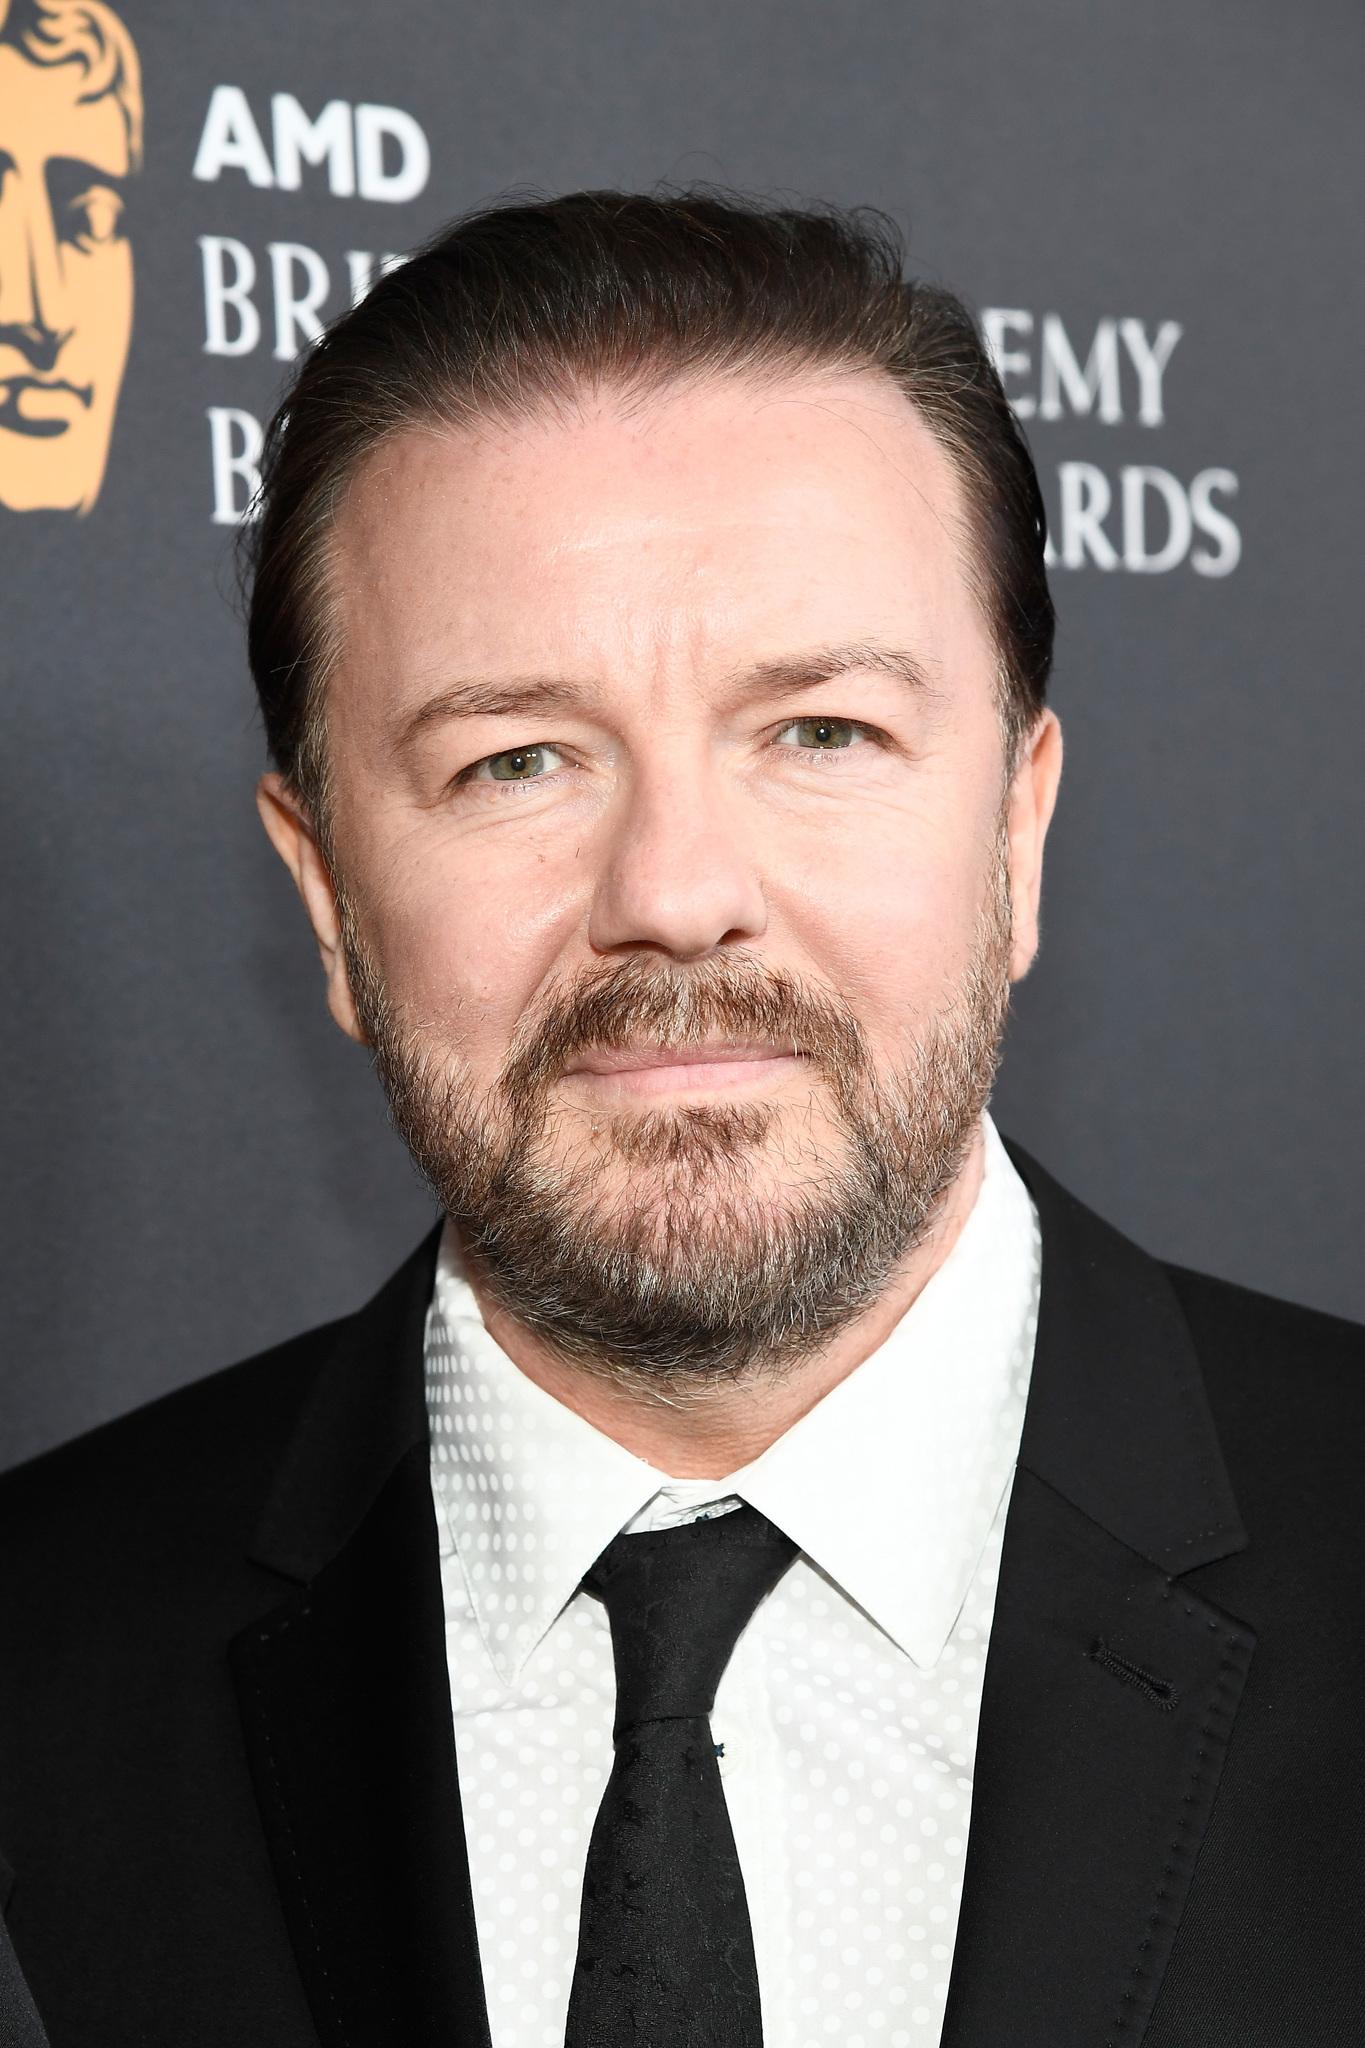 Ricky Gervais image